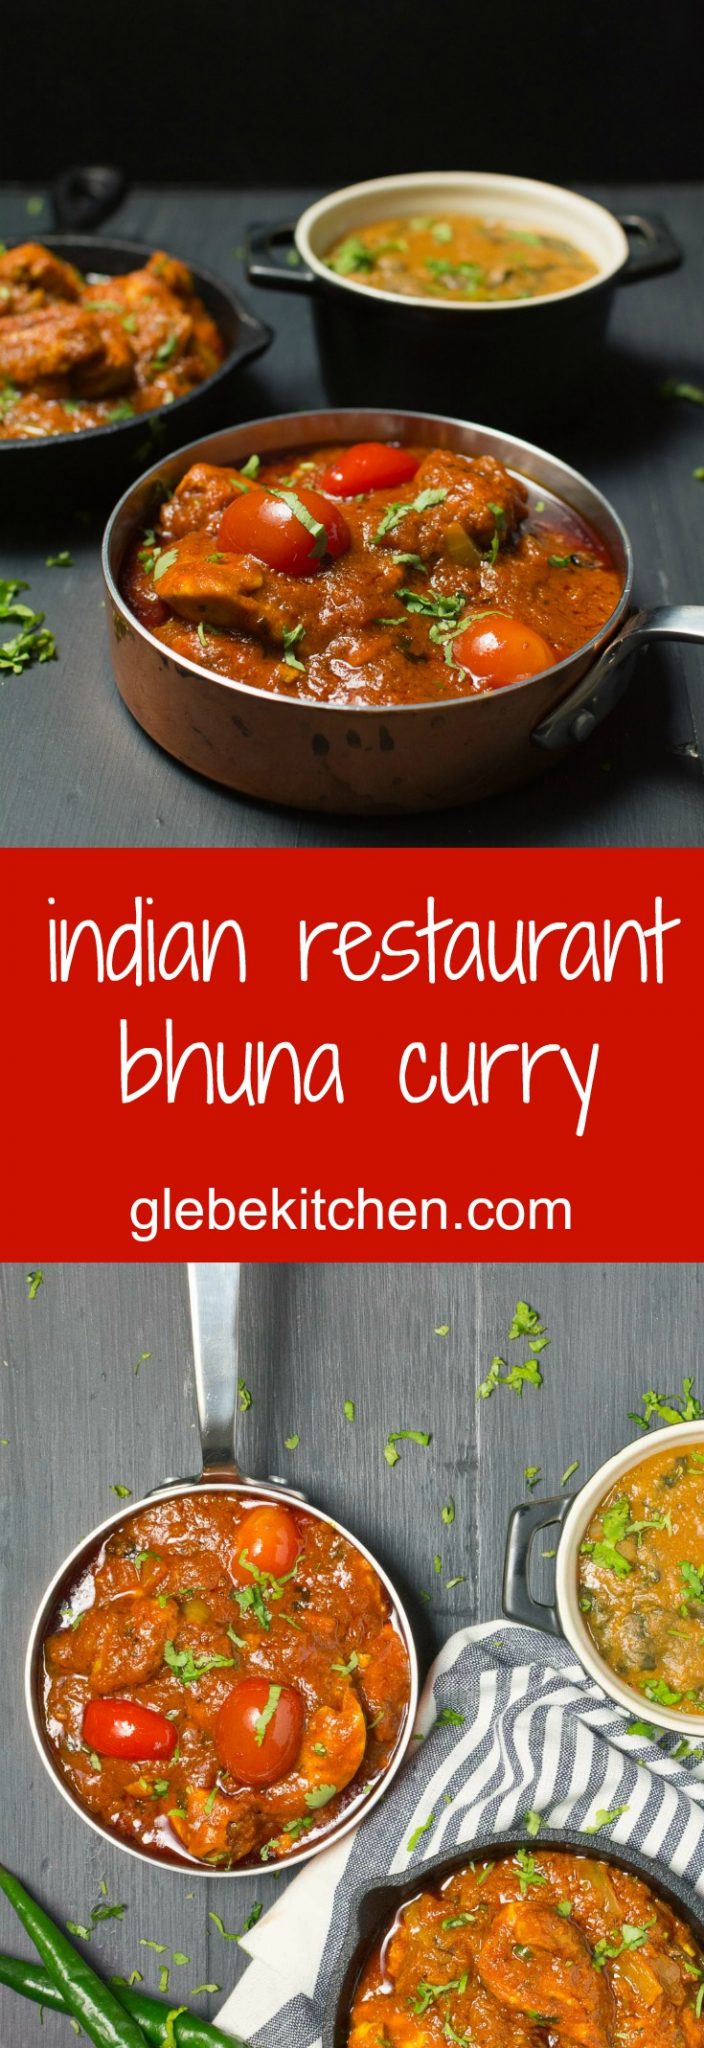 Indian restaurant bhuna curry is a thick curry loaded with tomato, spices and onions.